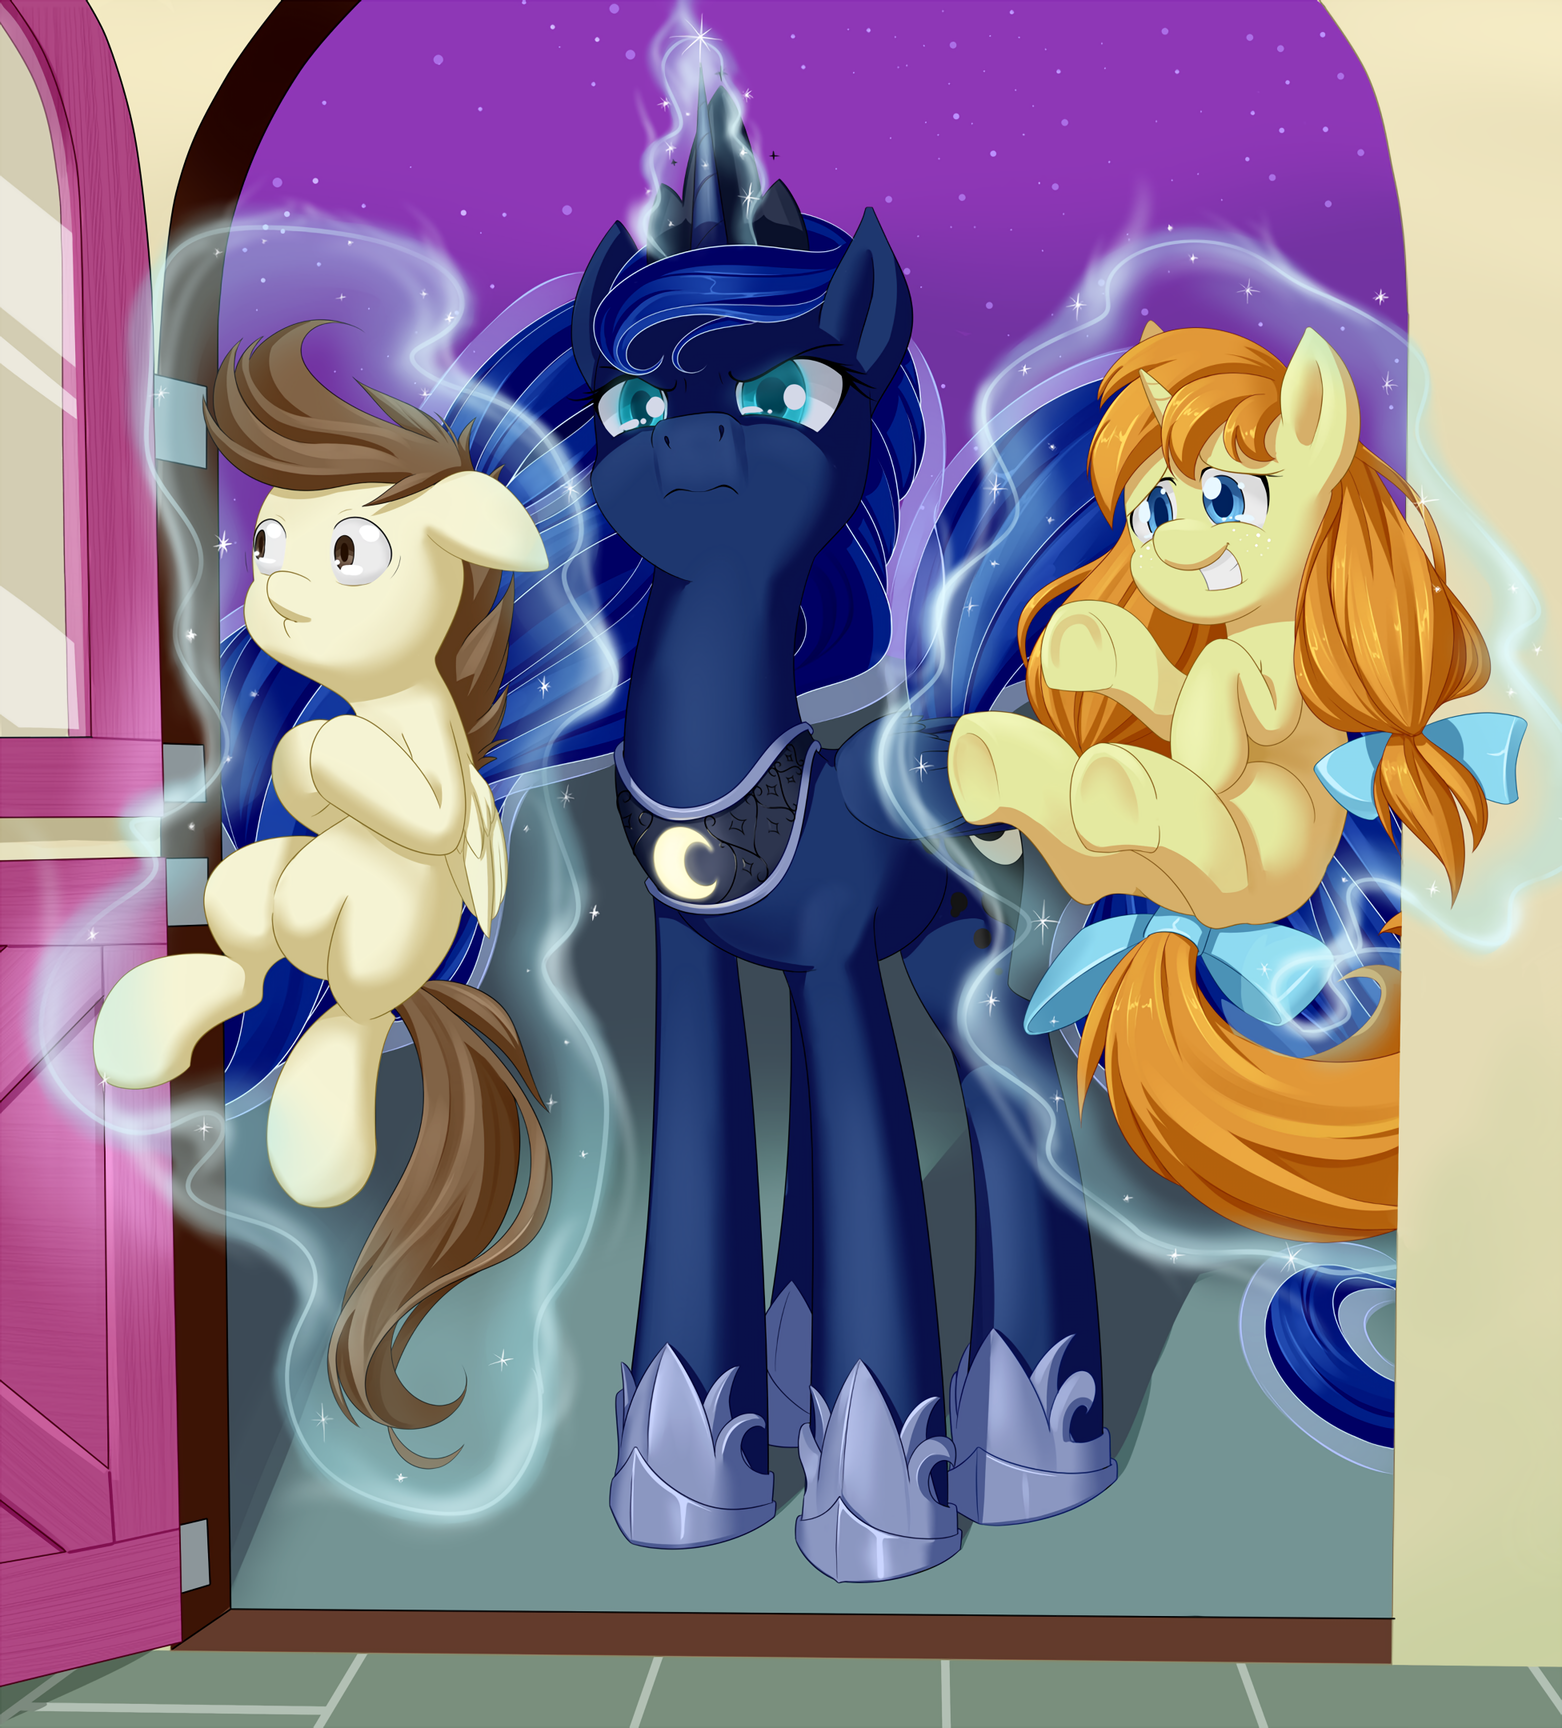 Are These Yours? - My little pony, Princess luna, Pound Cake, Pumpkin Cake, Dstears